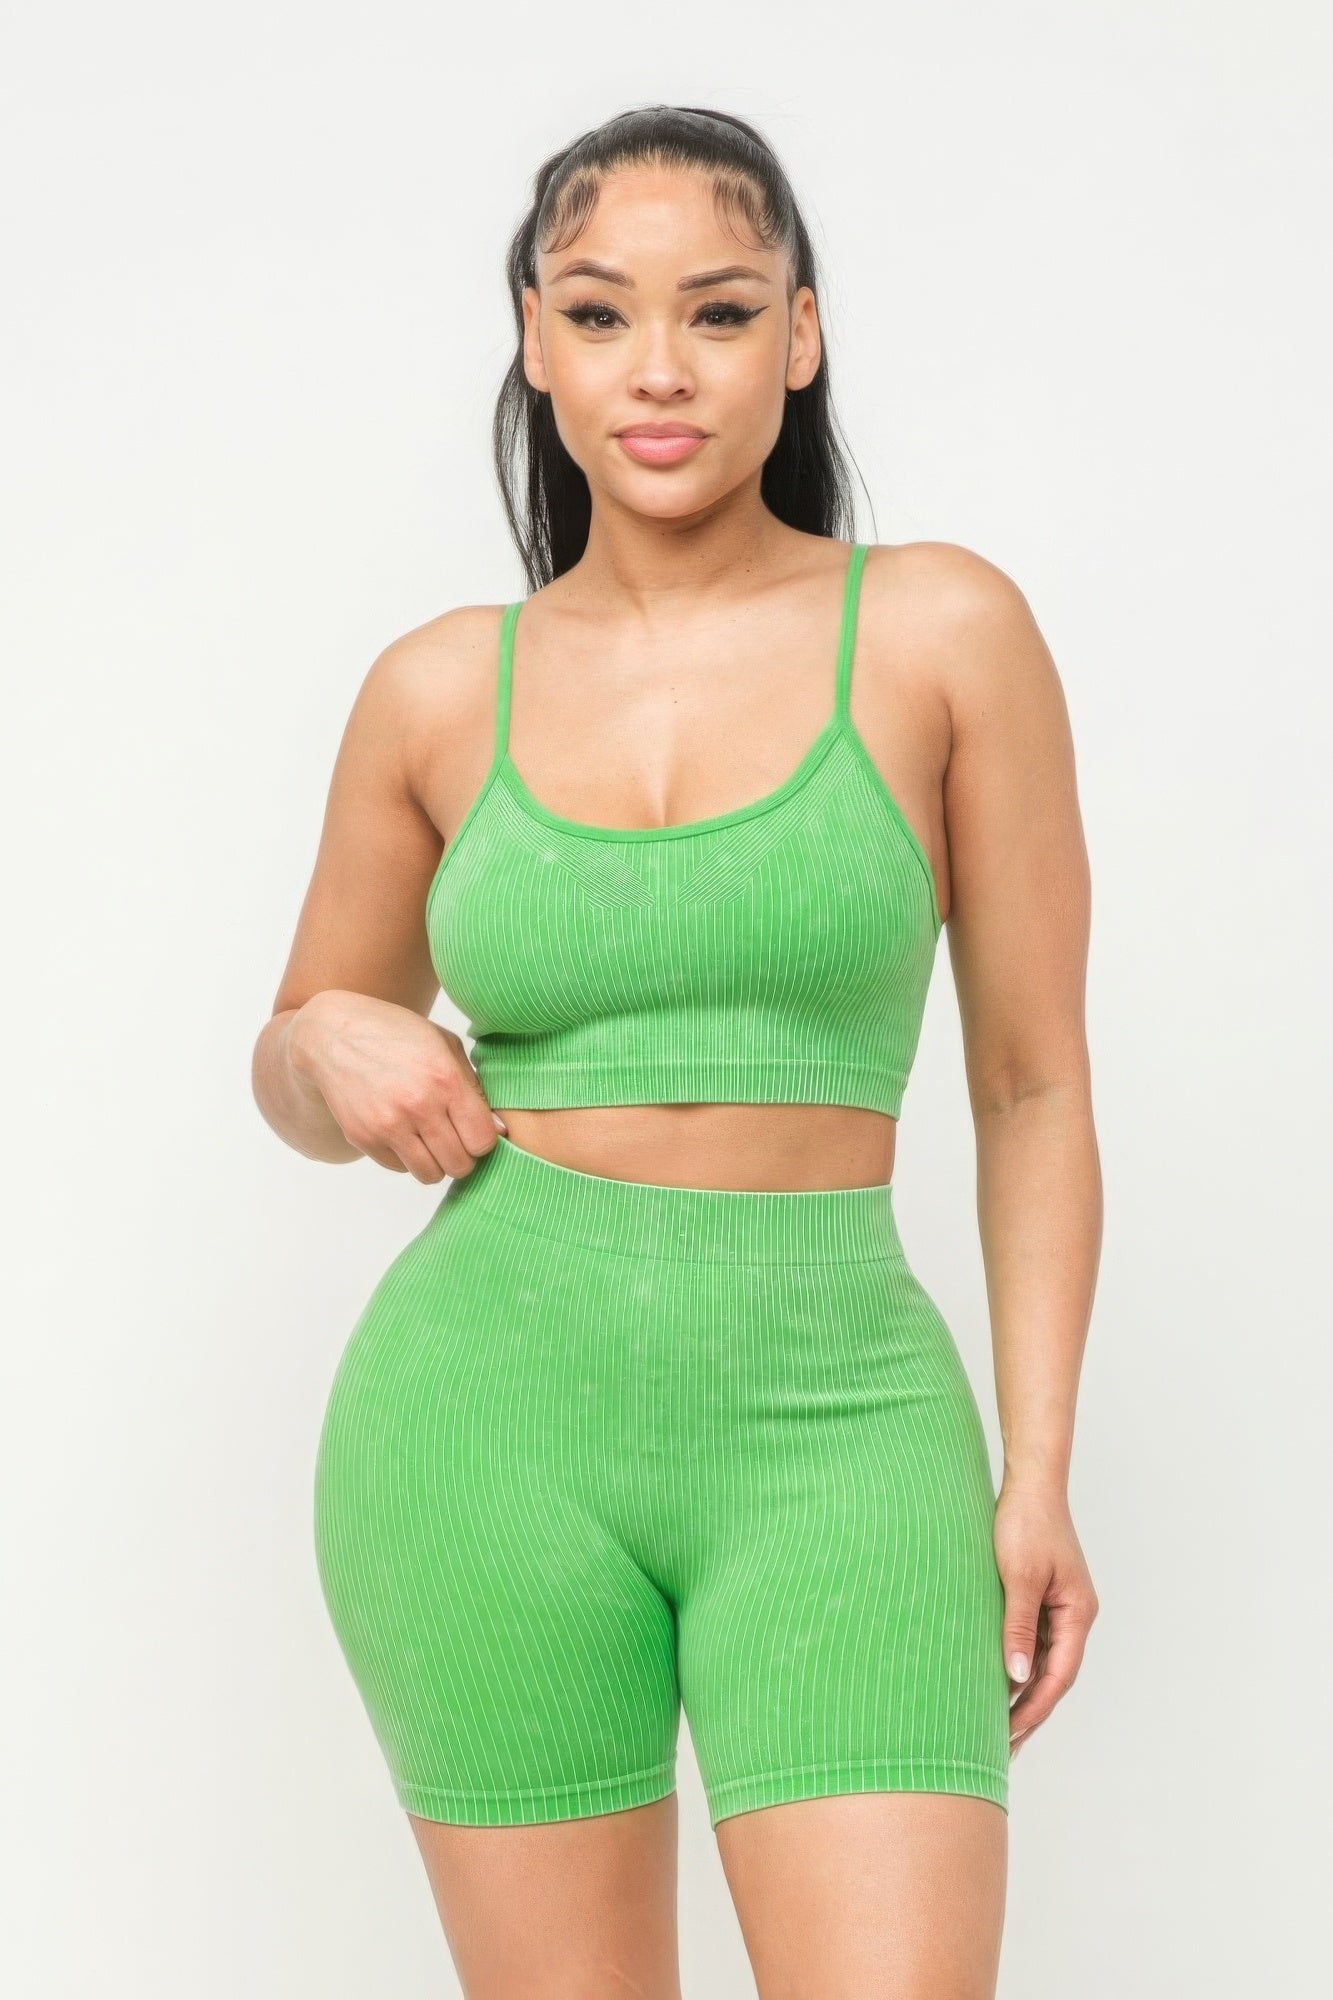 Washed Seamless Basic Tank Top And Shorts Set - Supreme Deals